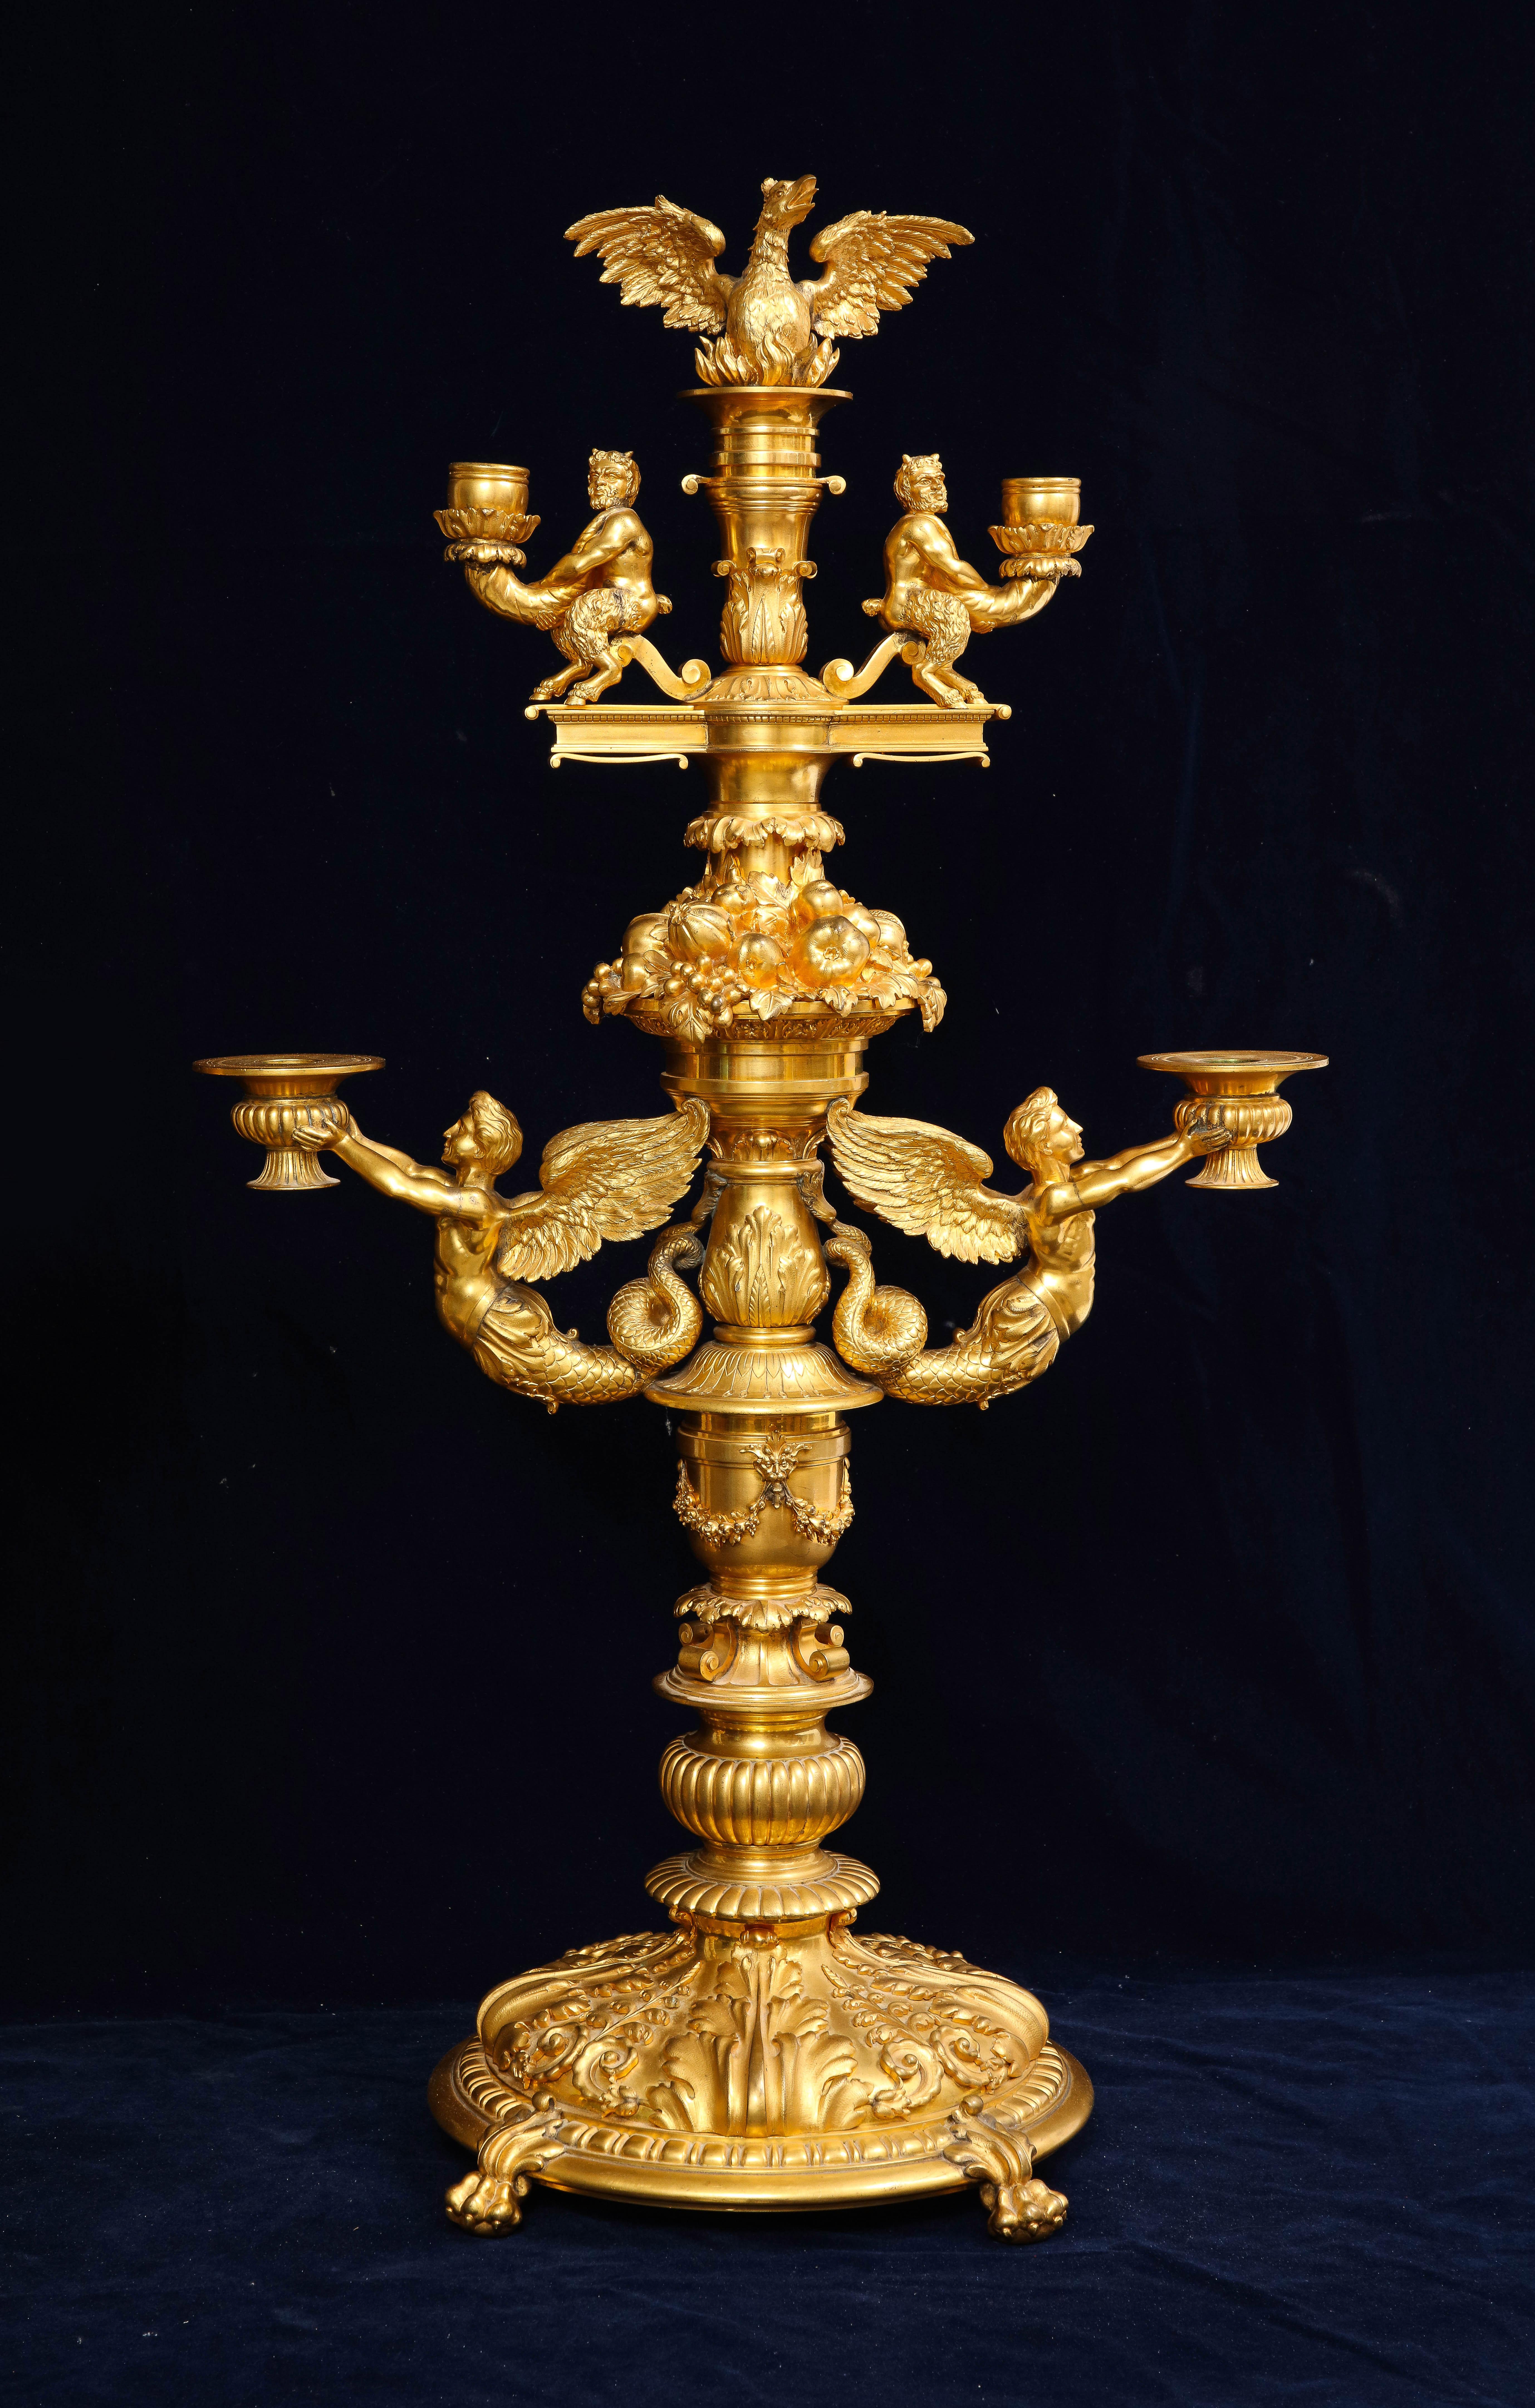 Marvelous Pair of 19th C. French Ormolu Four Arm Candelabras, Signed P. Canaux For Sale 1